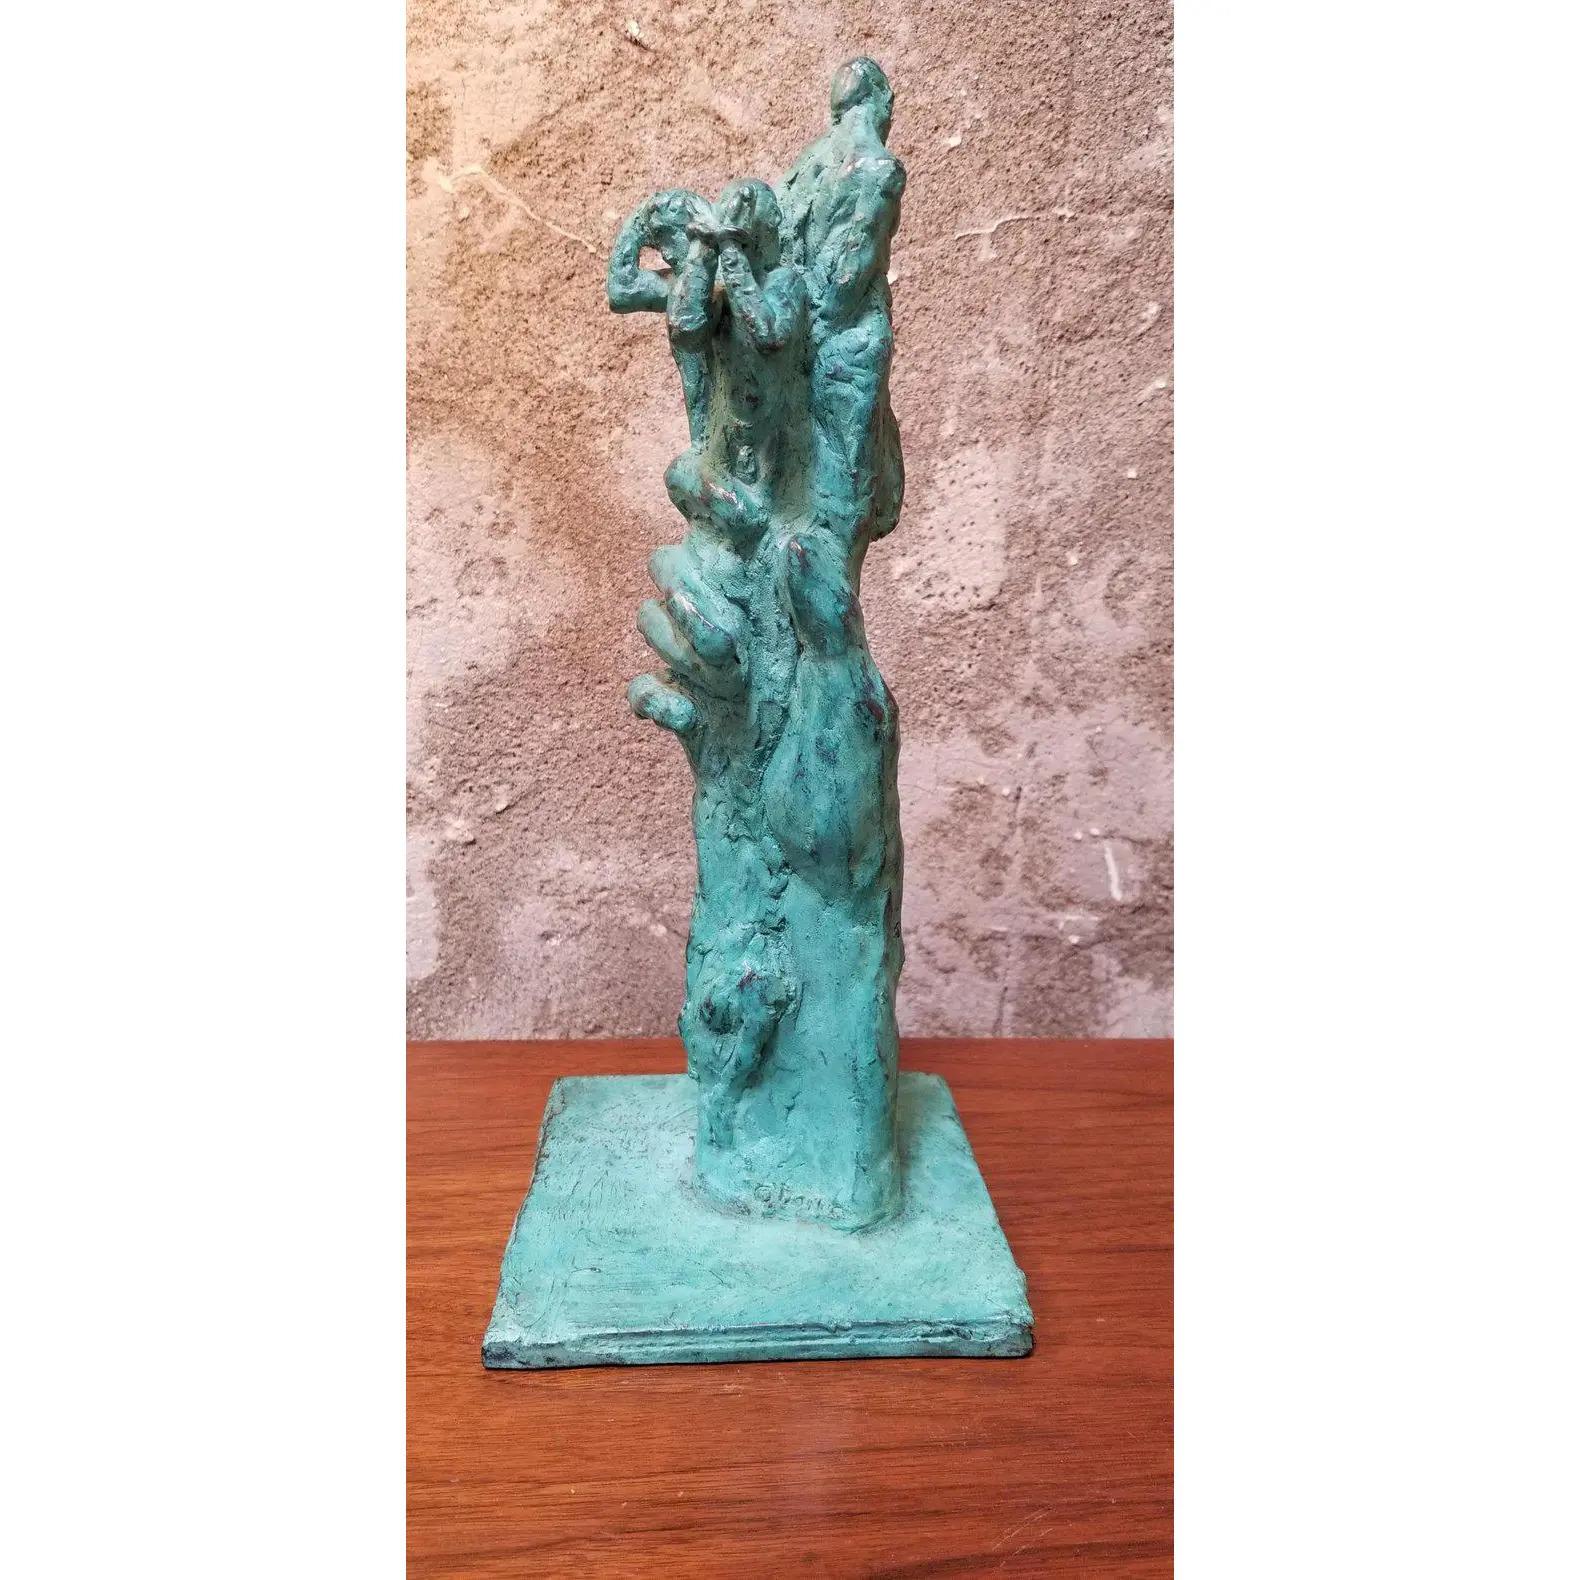 Cast Bronze Sculpture Figures and Hand For Sale